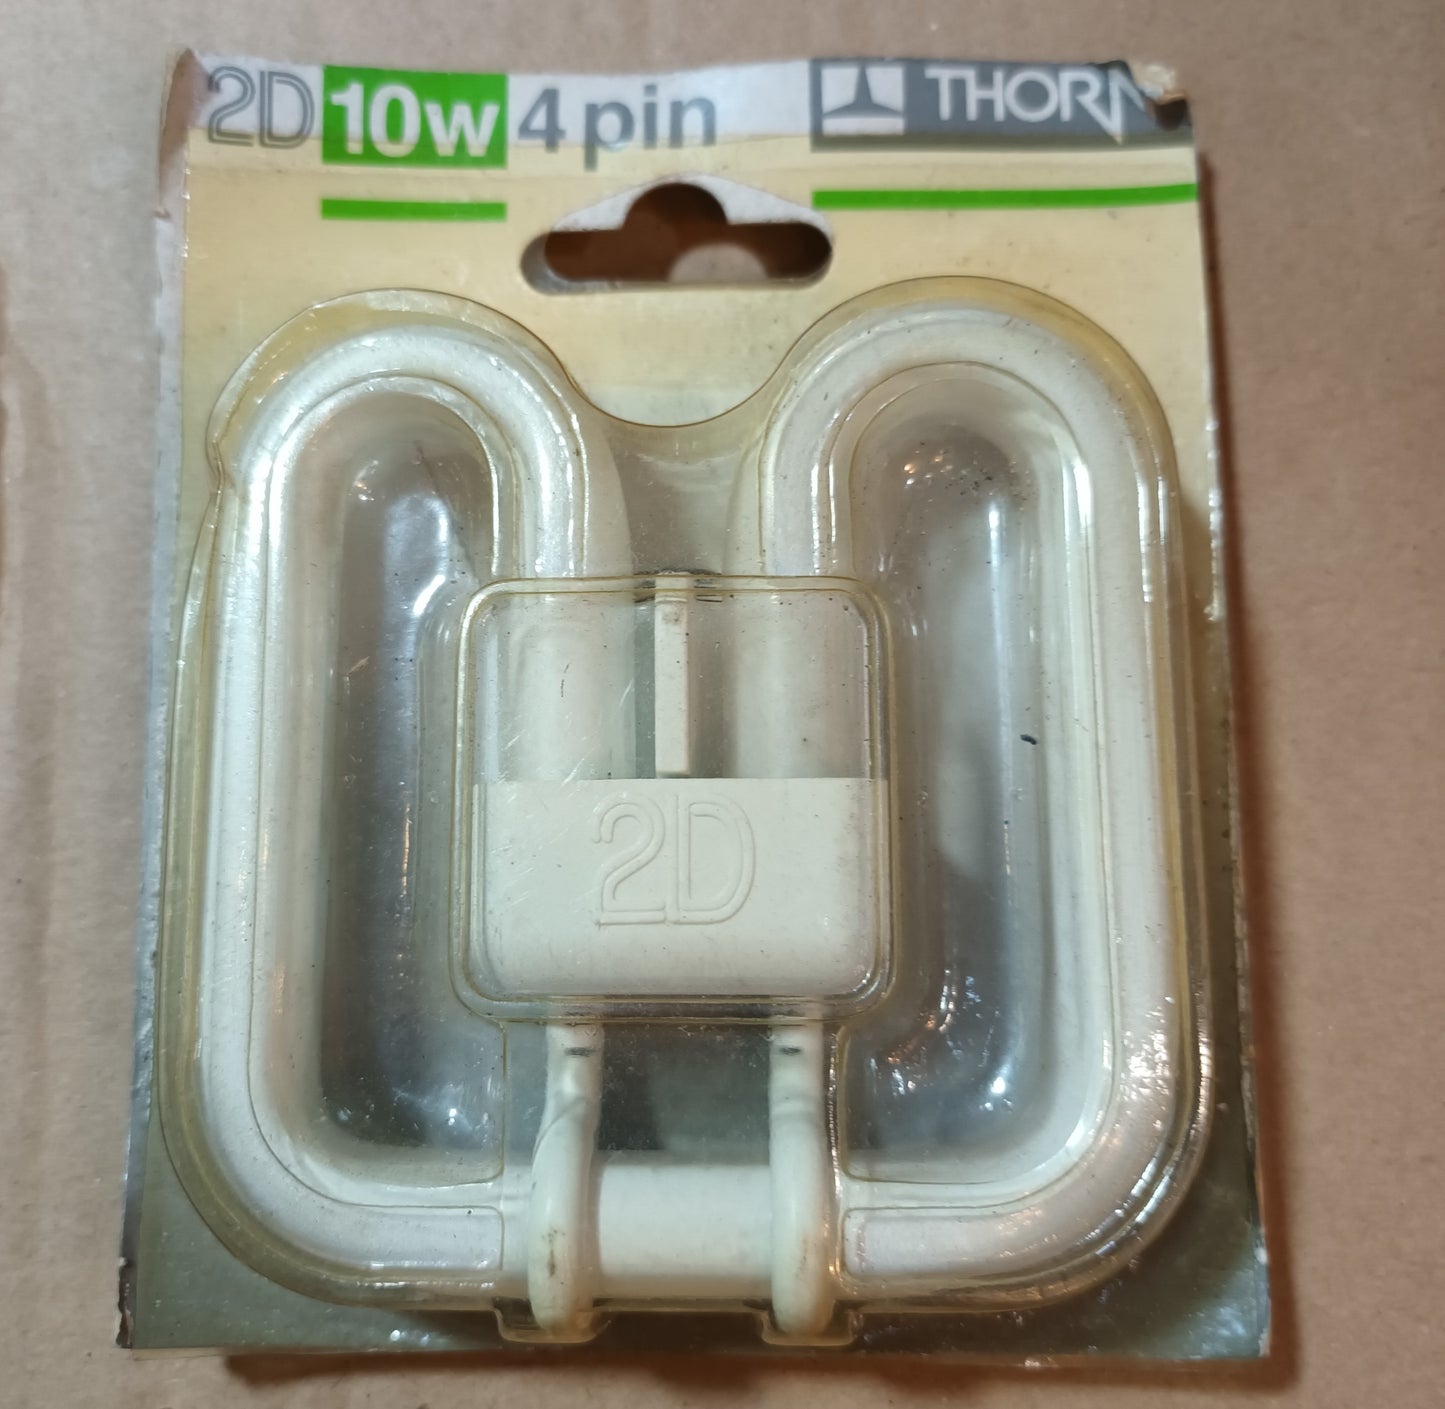 2D 10Watt 4-PIN 2700 / Warm White Lamp by Thorn from £9.50